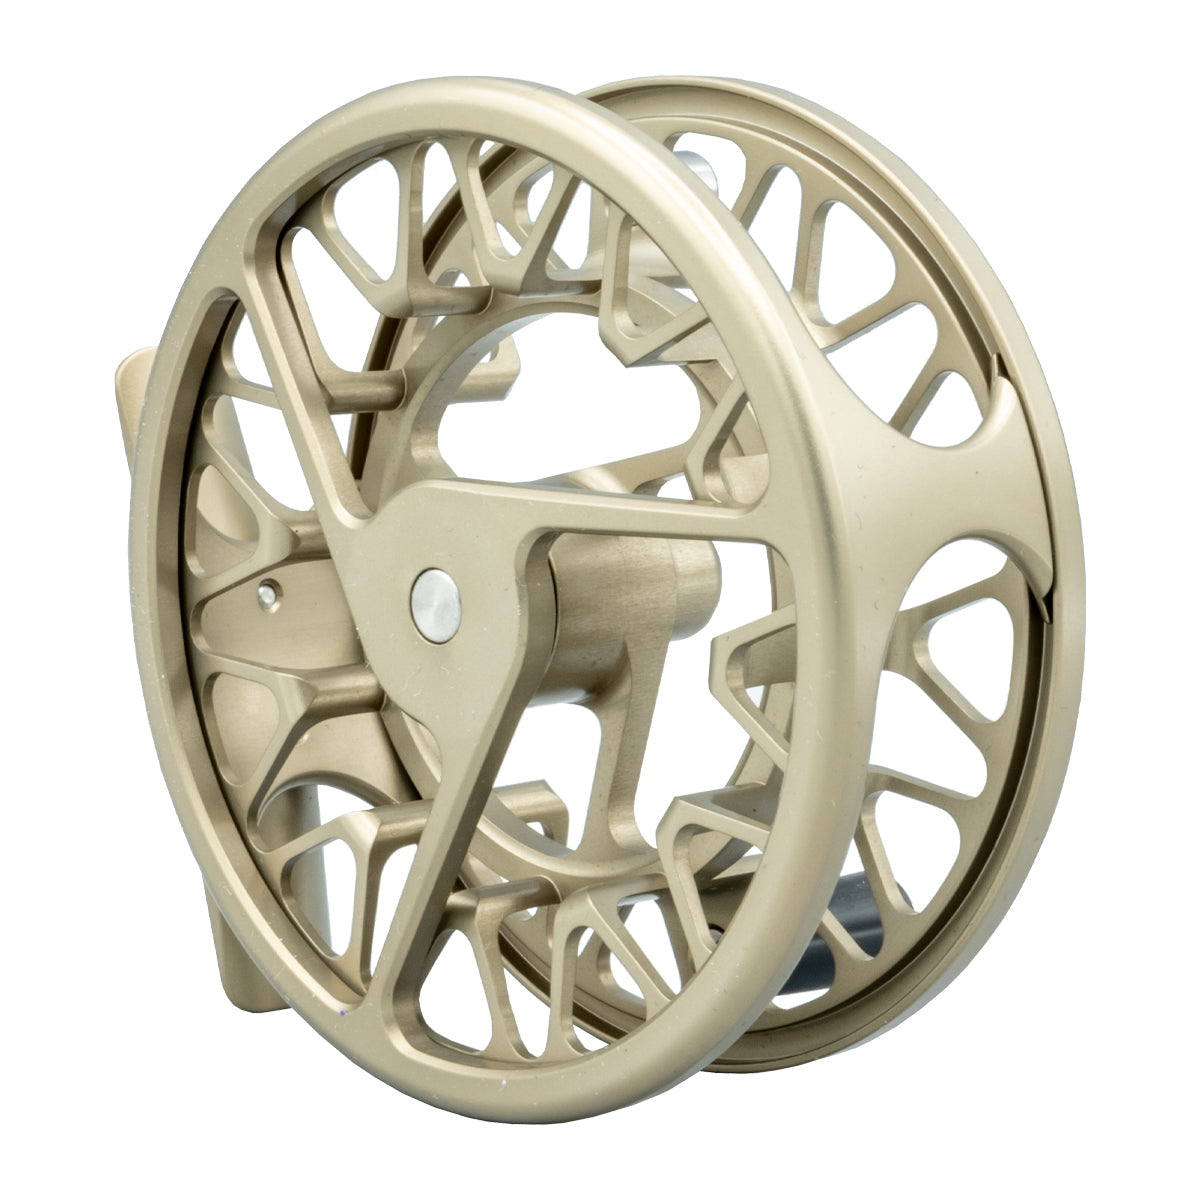 Galvan Torque Fly Reel – Bow River Troutfitters